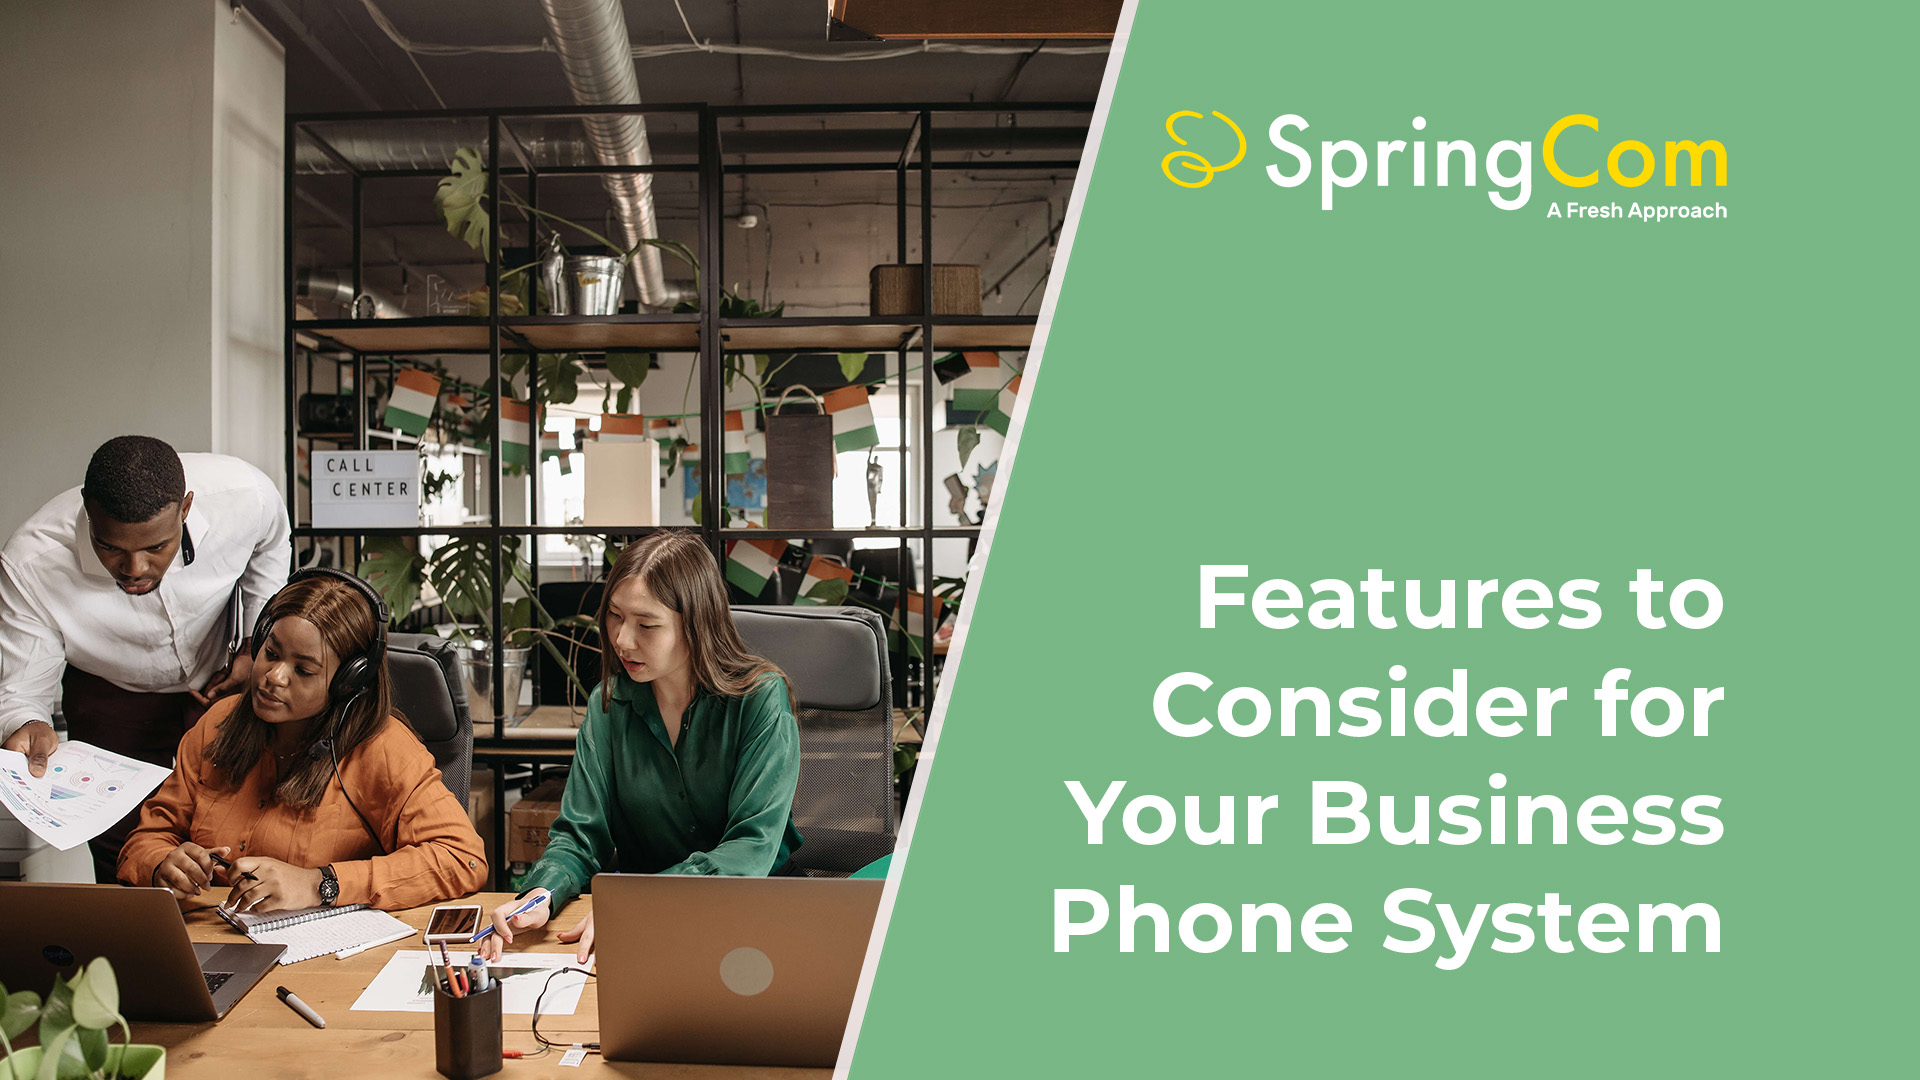 Features to Consider for Your Business Phone System